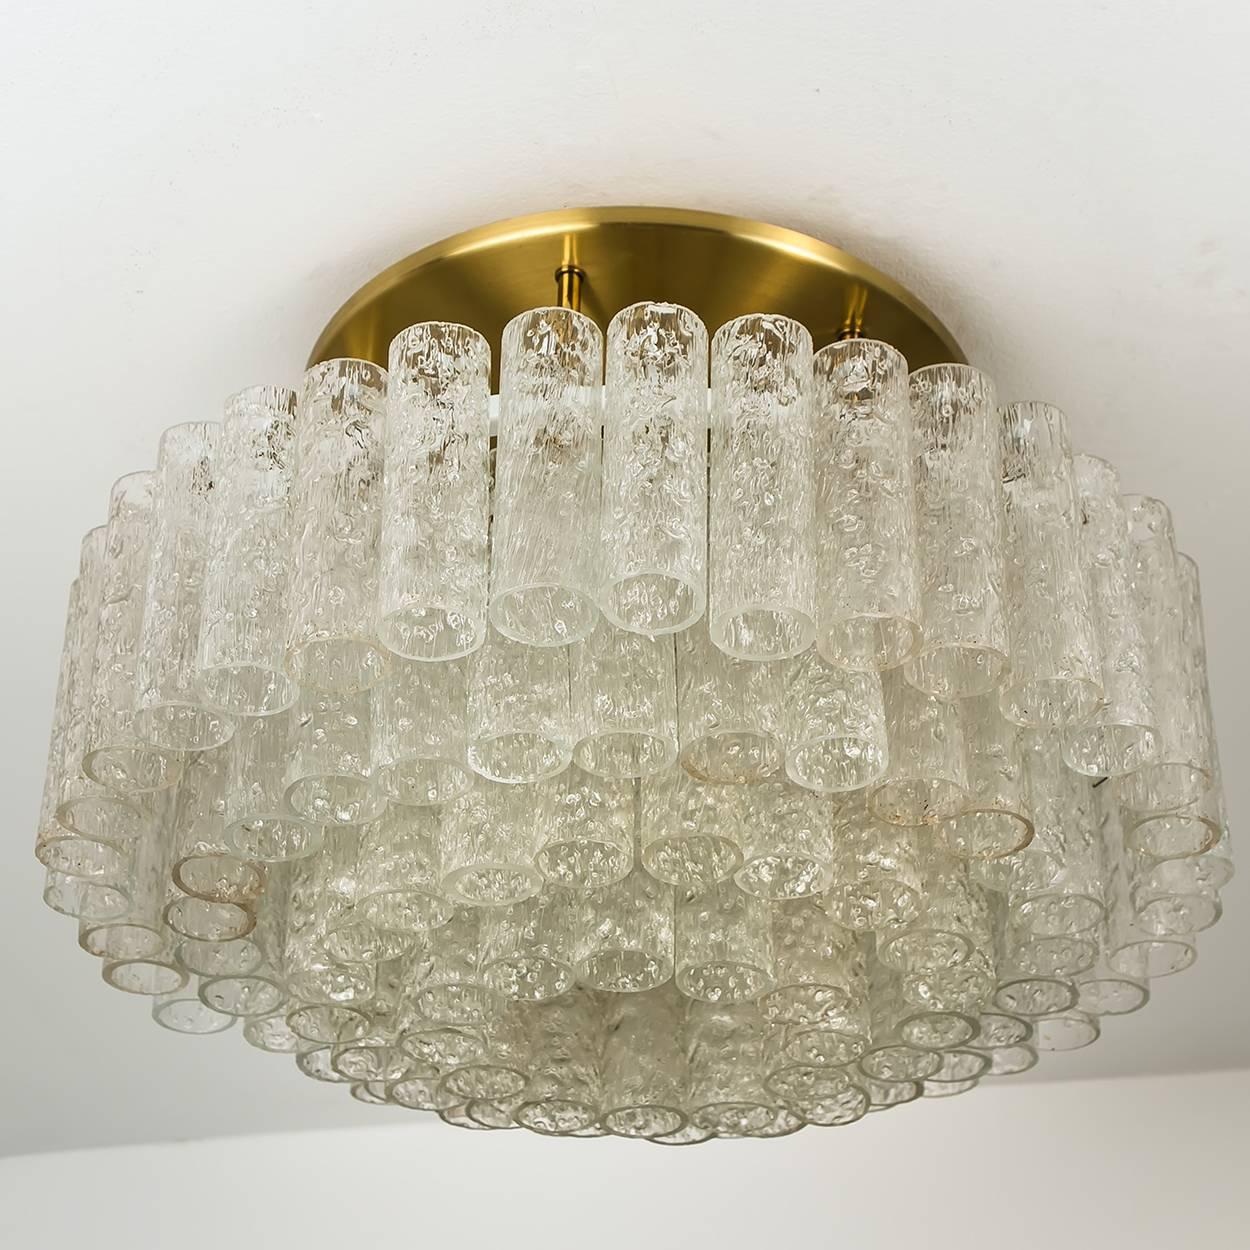 Set of Three Large Glass Brass Light Fixtures by Doria, Germany, 1969 For Sale 8